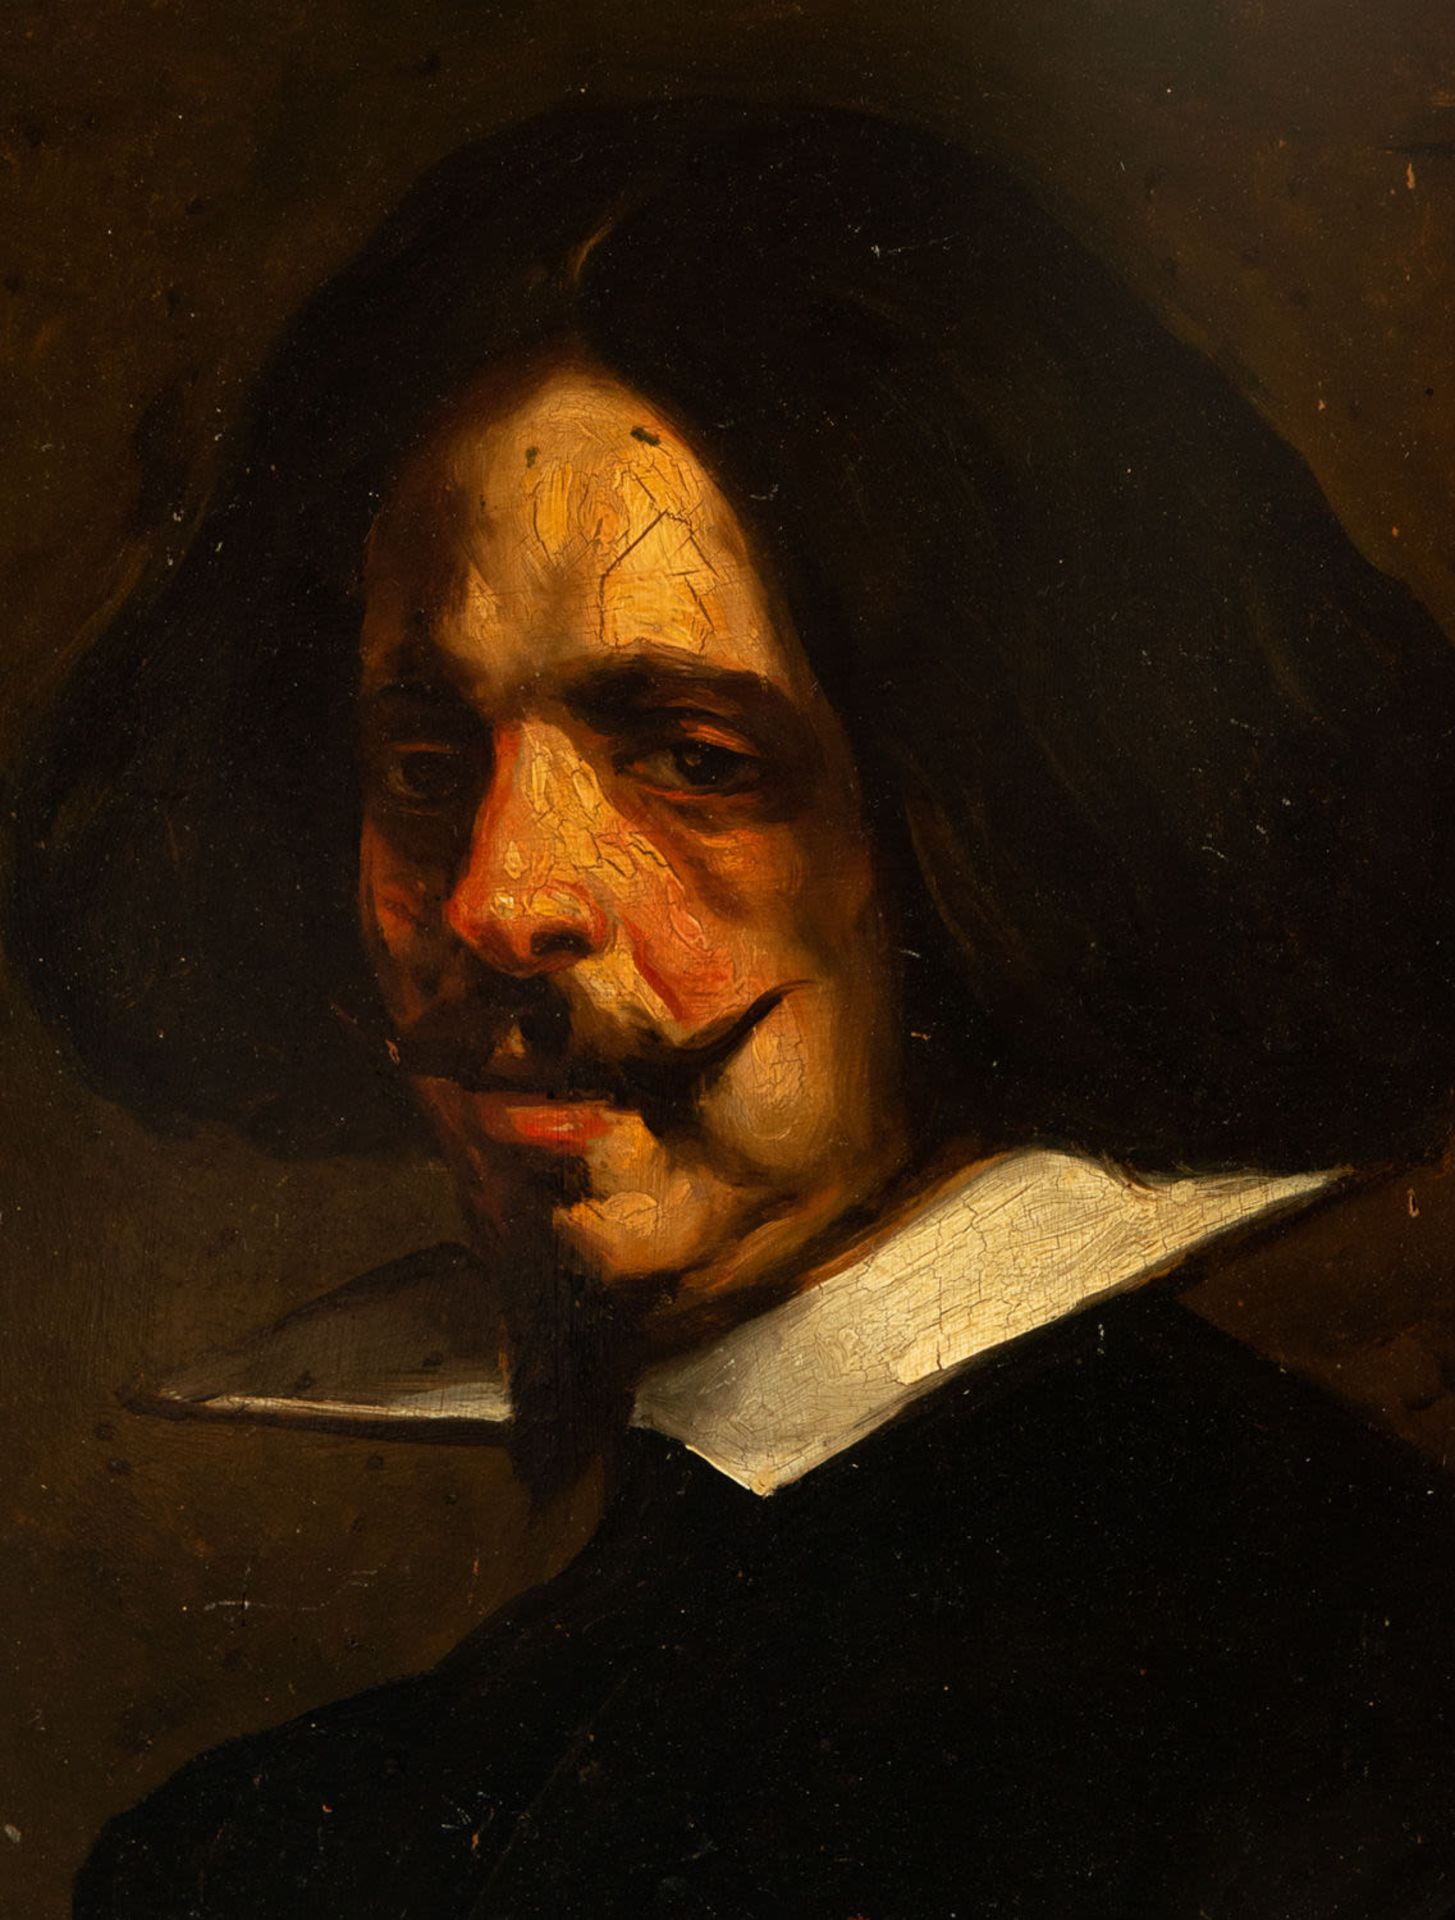 Self-portrait of Velázquez, following models of the 17th century, Spanish school of the 19th century - Image 2 of 6